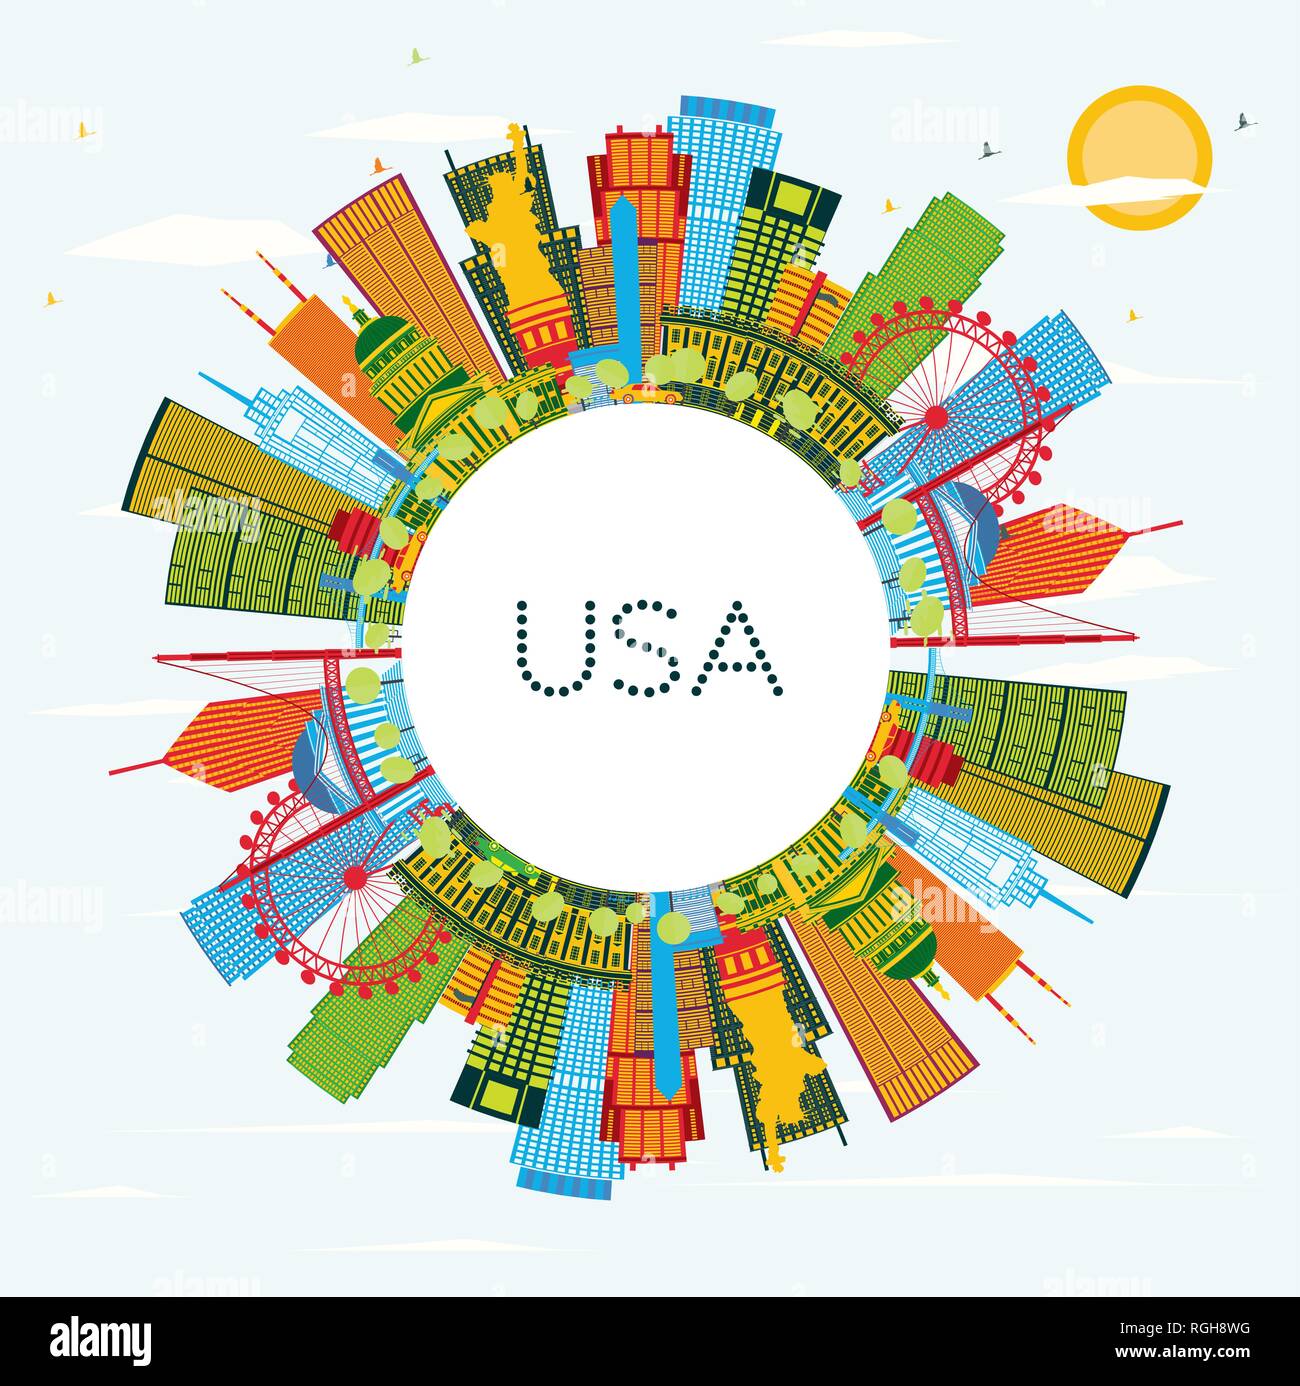 USA Skyline with Color Skyscrapers and Landmarks. Vector Illustration. Business Travel and Tourism Concept with Modern Architecture. Stock Vector